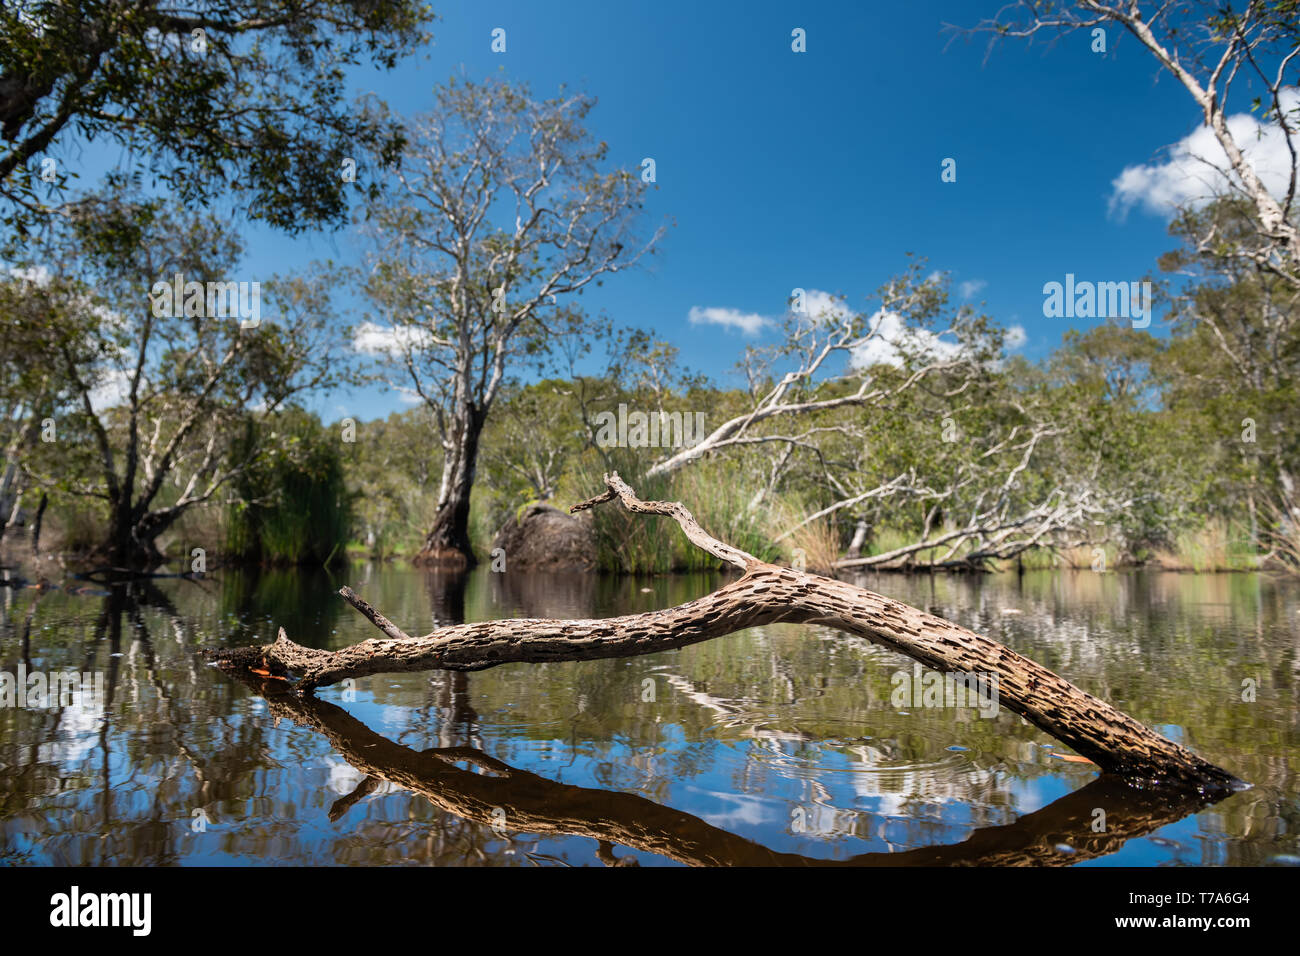 Environment of botanical garden wetland trees and water with sun lighting and blue sky. Stock Photo